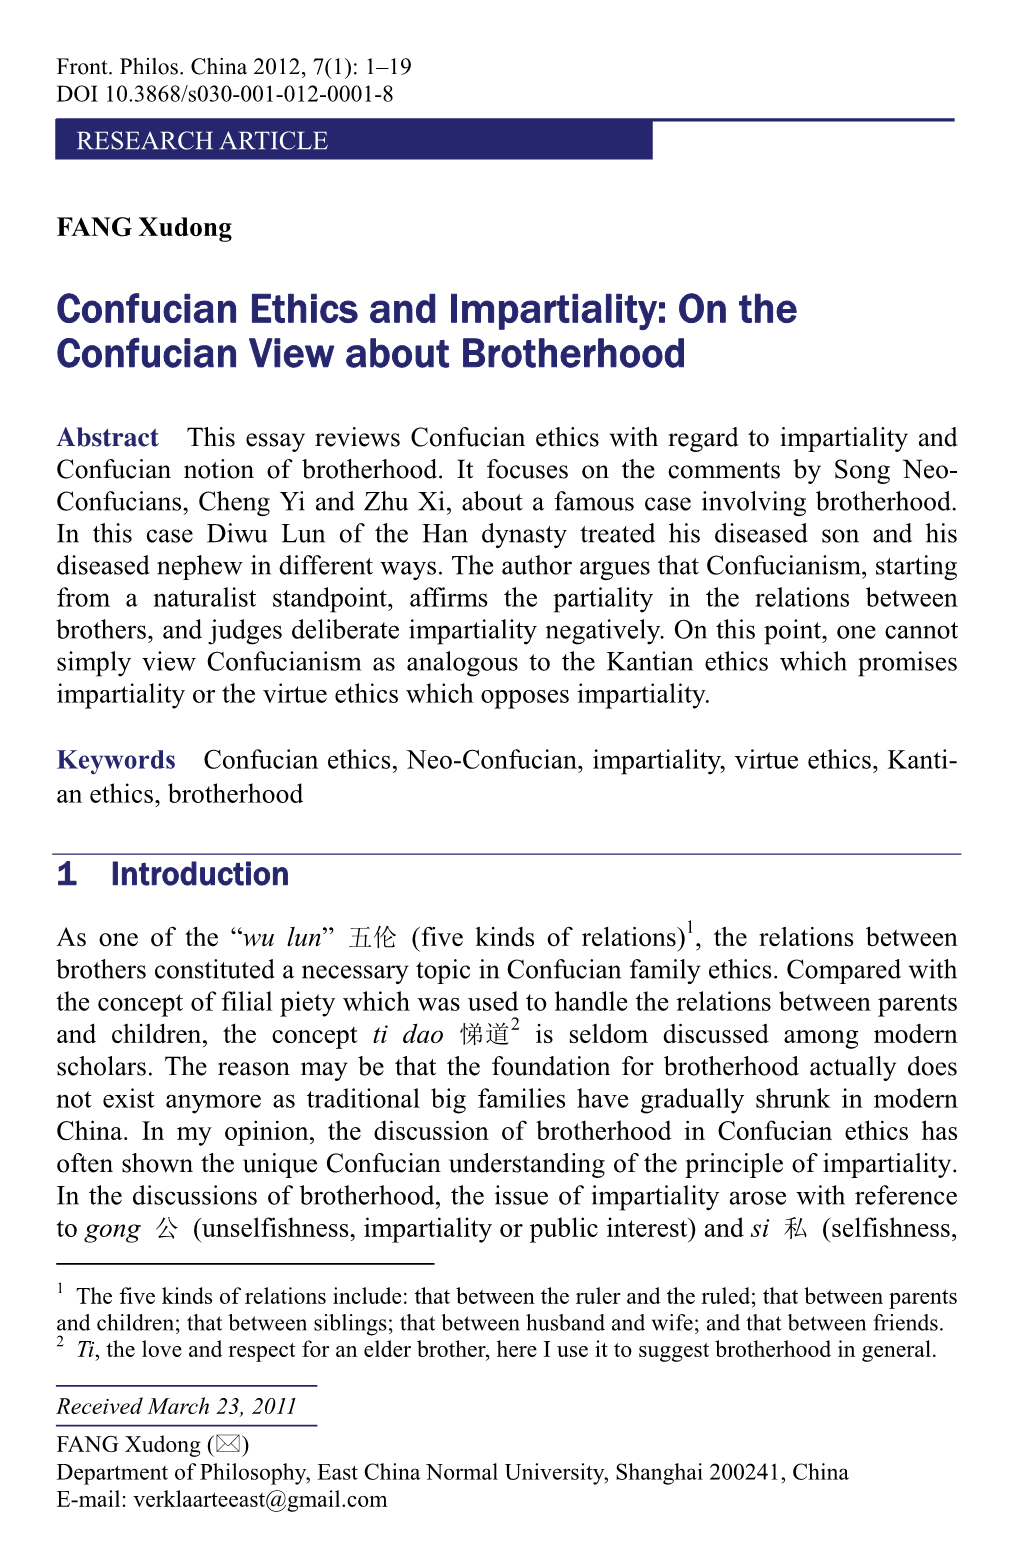 Confucian Ethics and Impartiality: on the Confucian View About Brotherhood